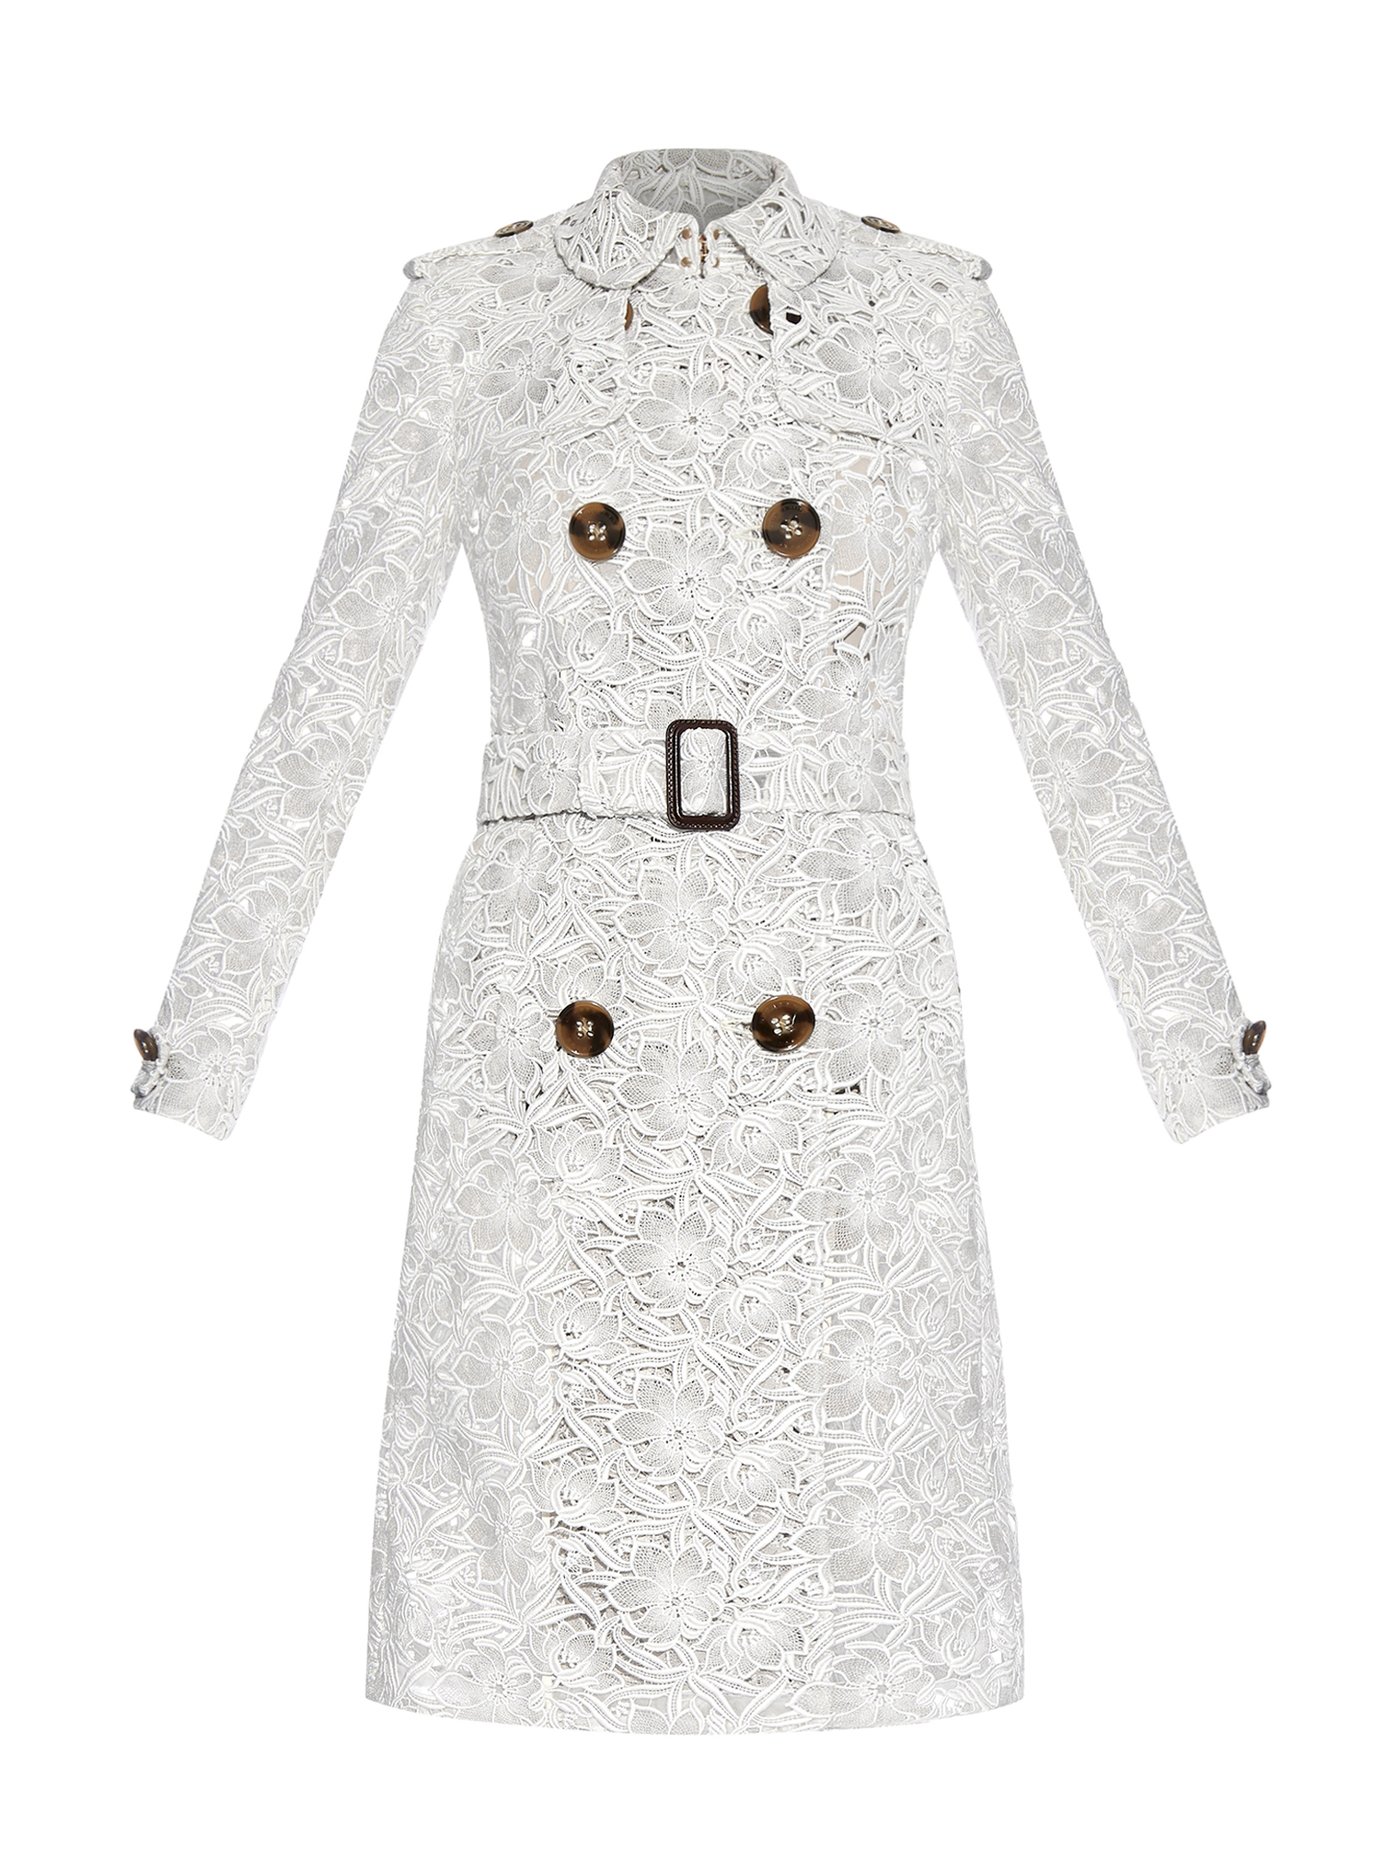 lace trench coat burberry